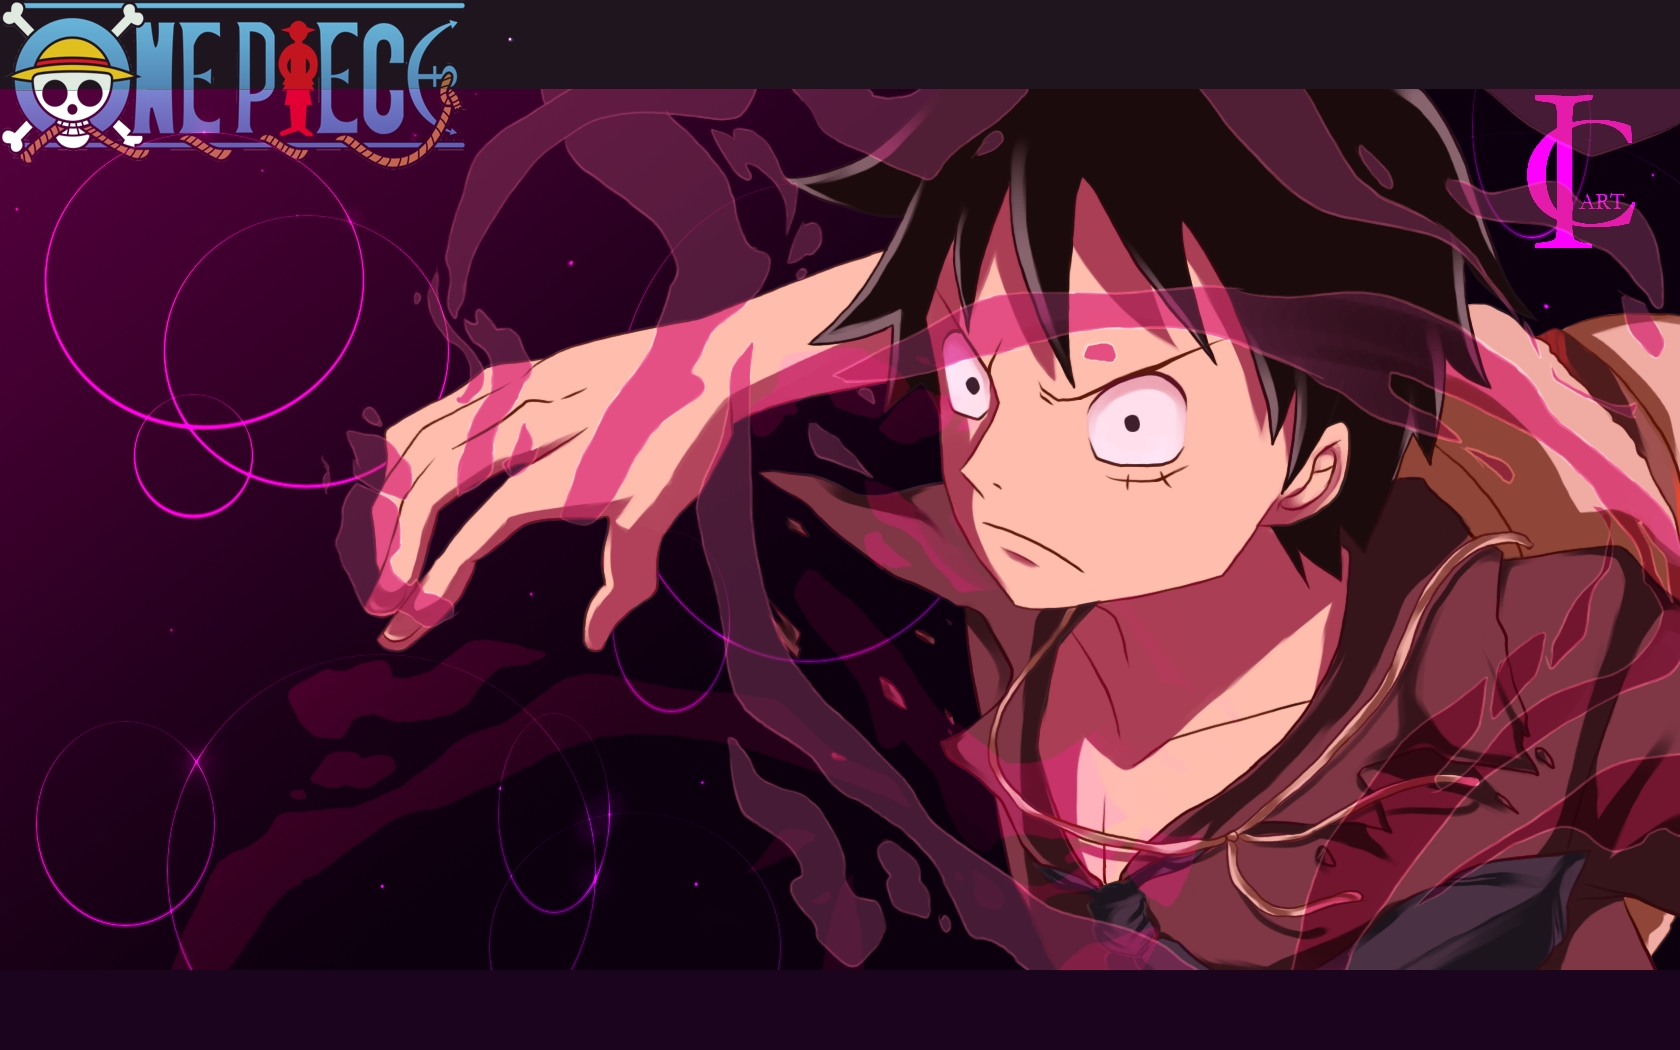 10 Finest And Latest One Piece Wallpaper Luffy Haki for Desktop Computer wi...